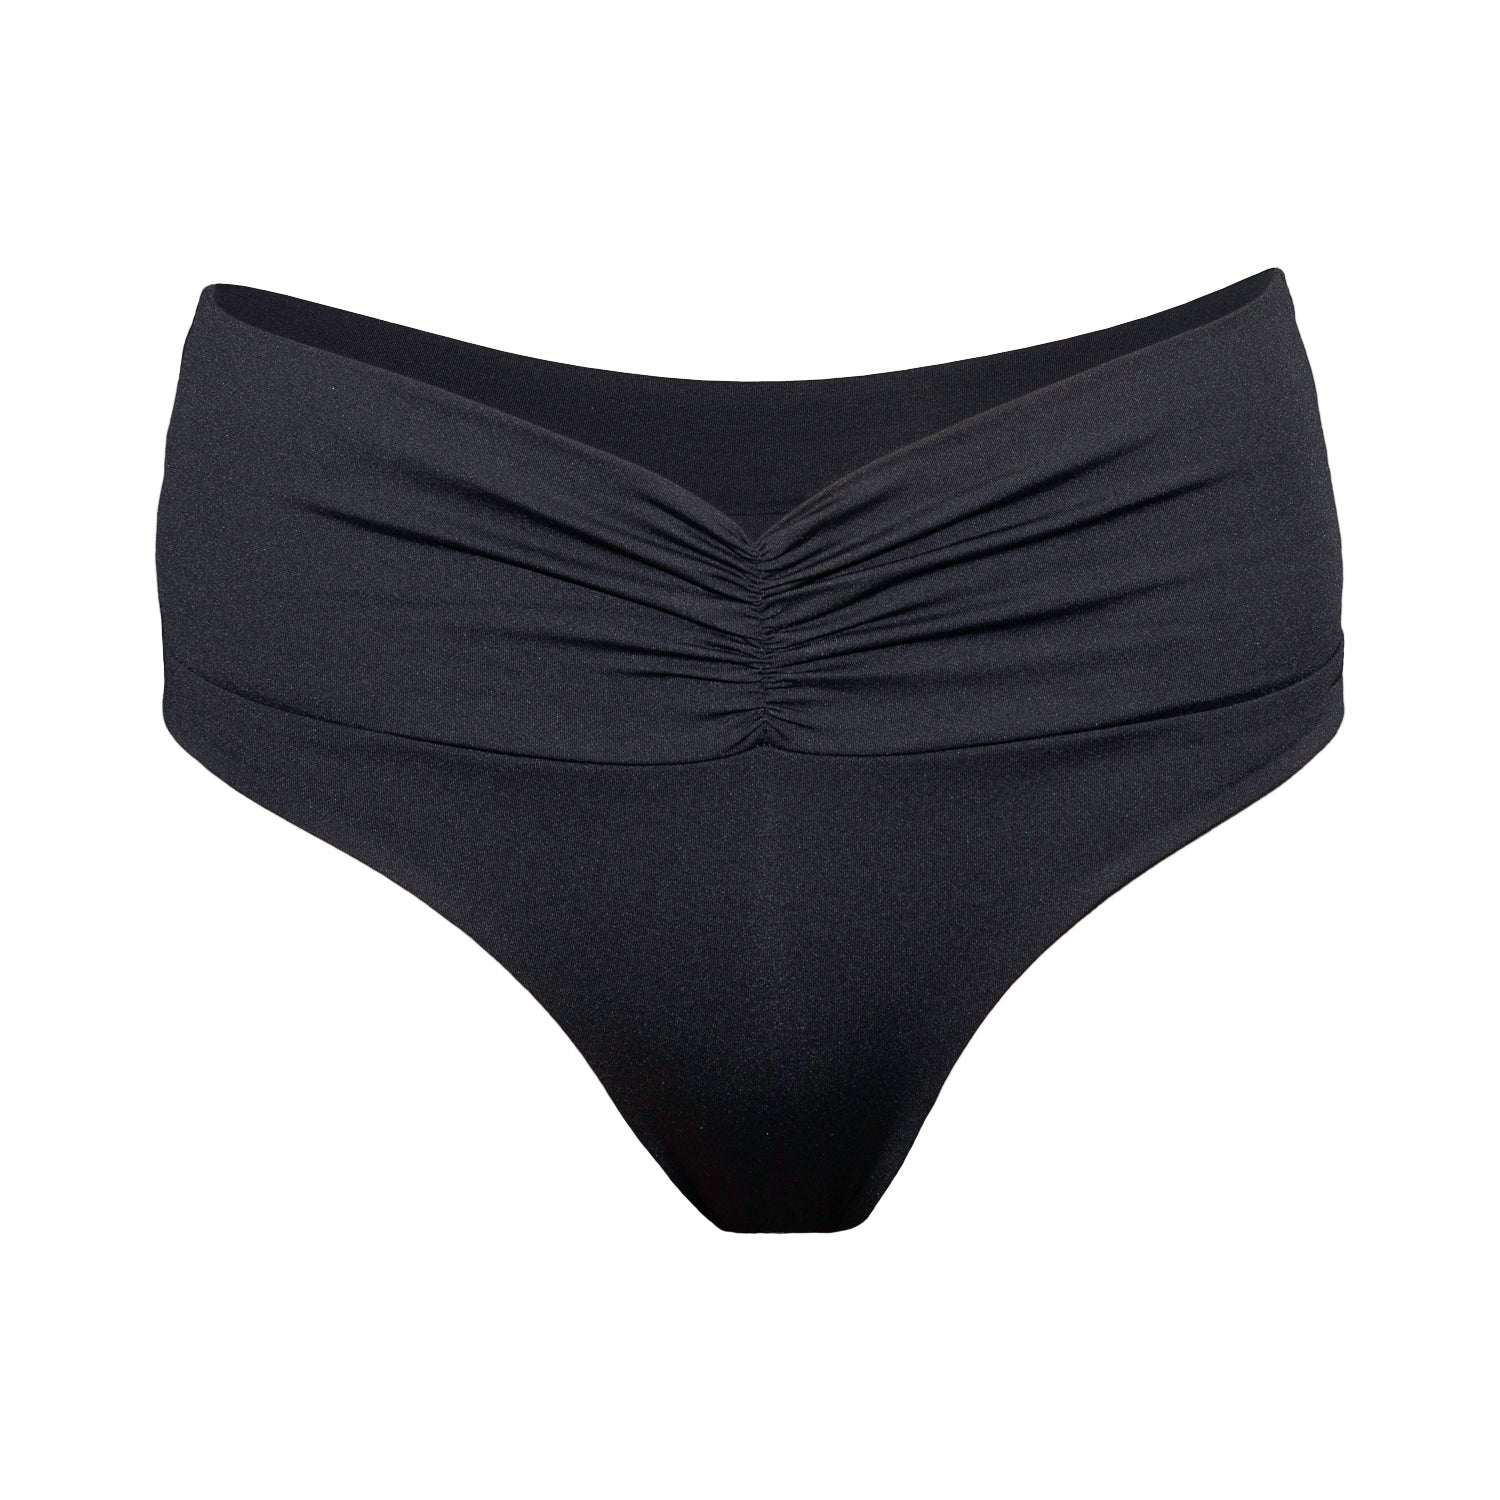 Adjustable high waist high rise bikini bottoms with an extra soft touch, fine lining and thick feel. Made sustainably and ethically in Europe from finest polyamide. Perfected fit for every body shape.